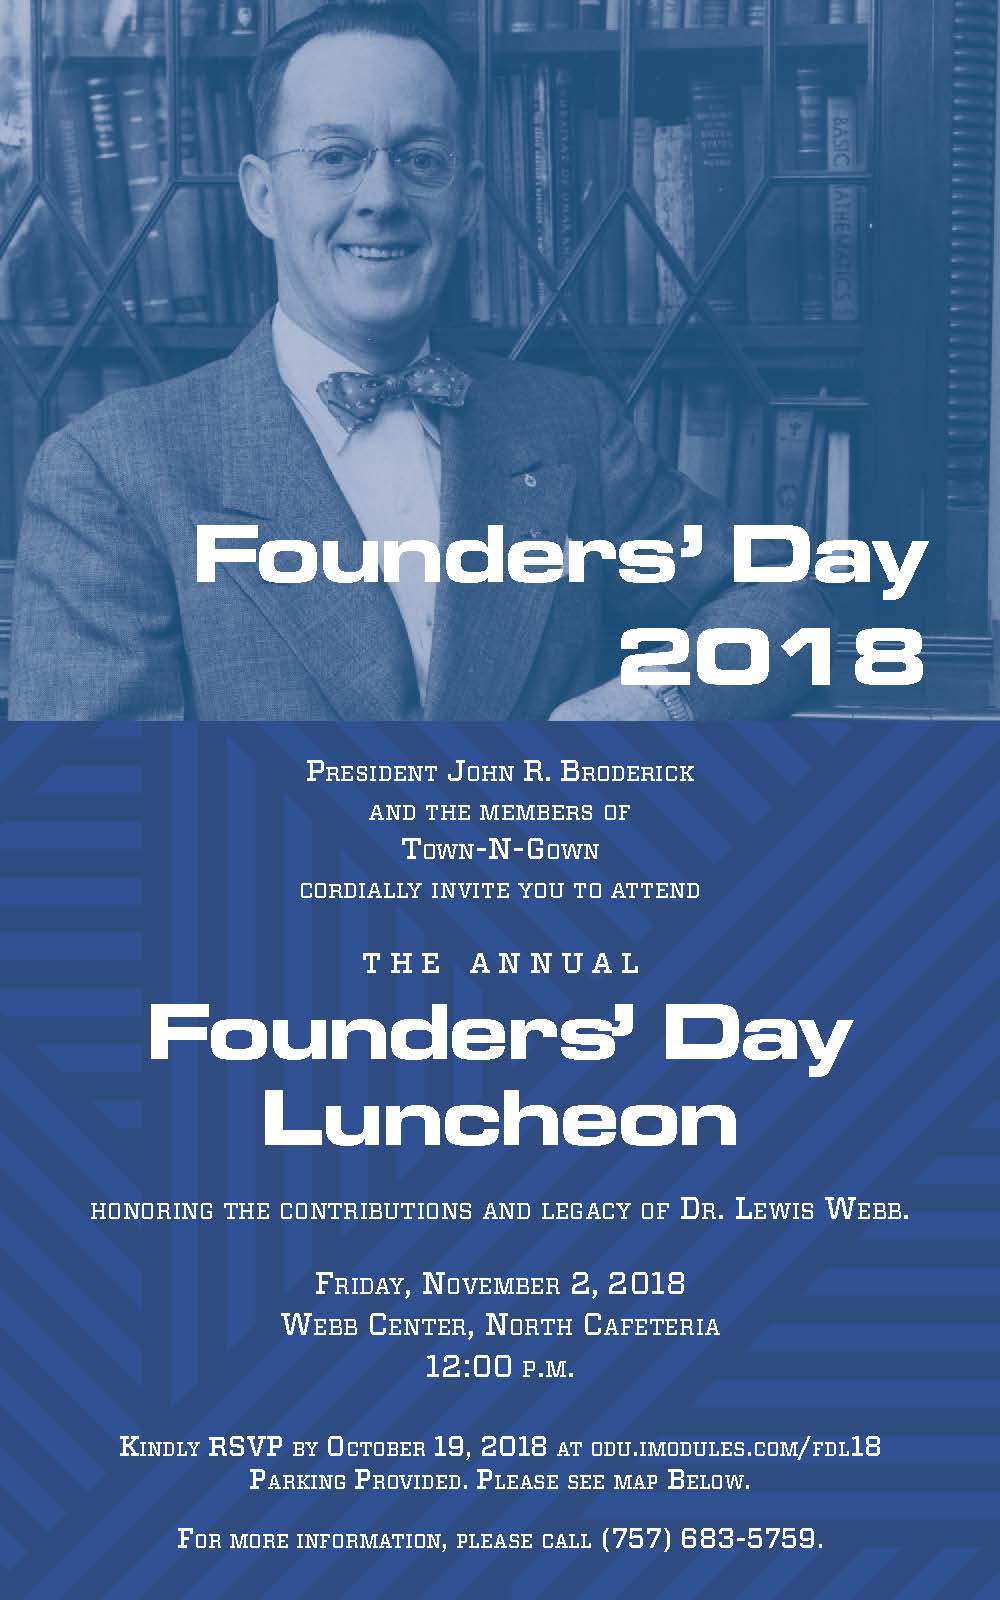 Founders' Day Luncheon scheduled for Nov. 2 at the Webb Center « News ODU